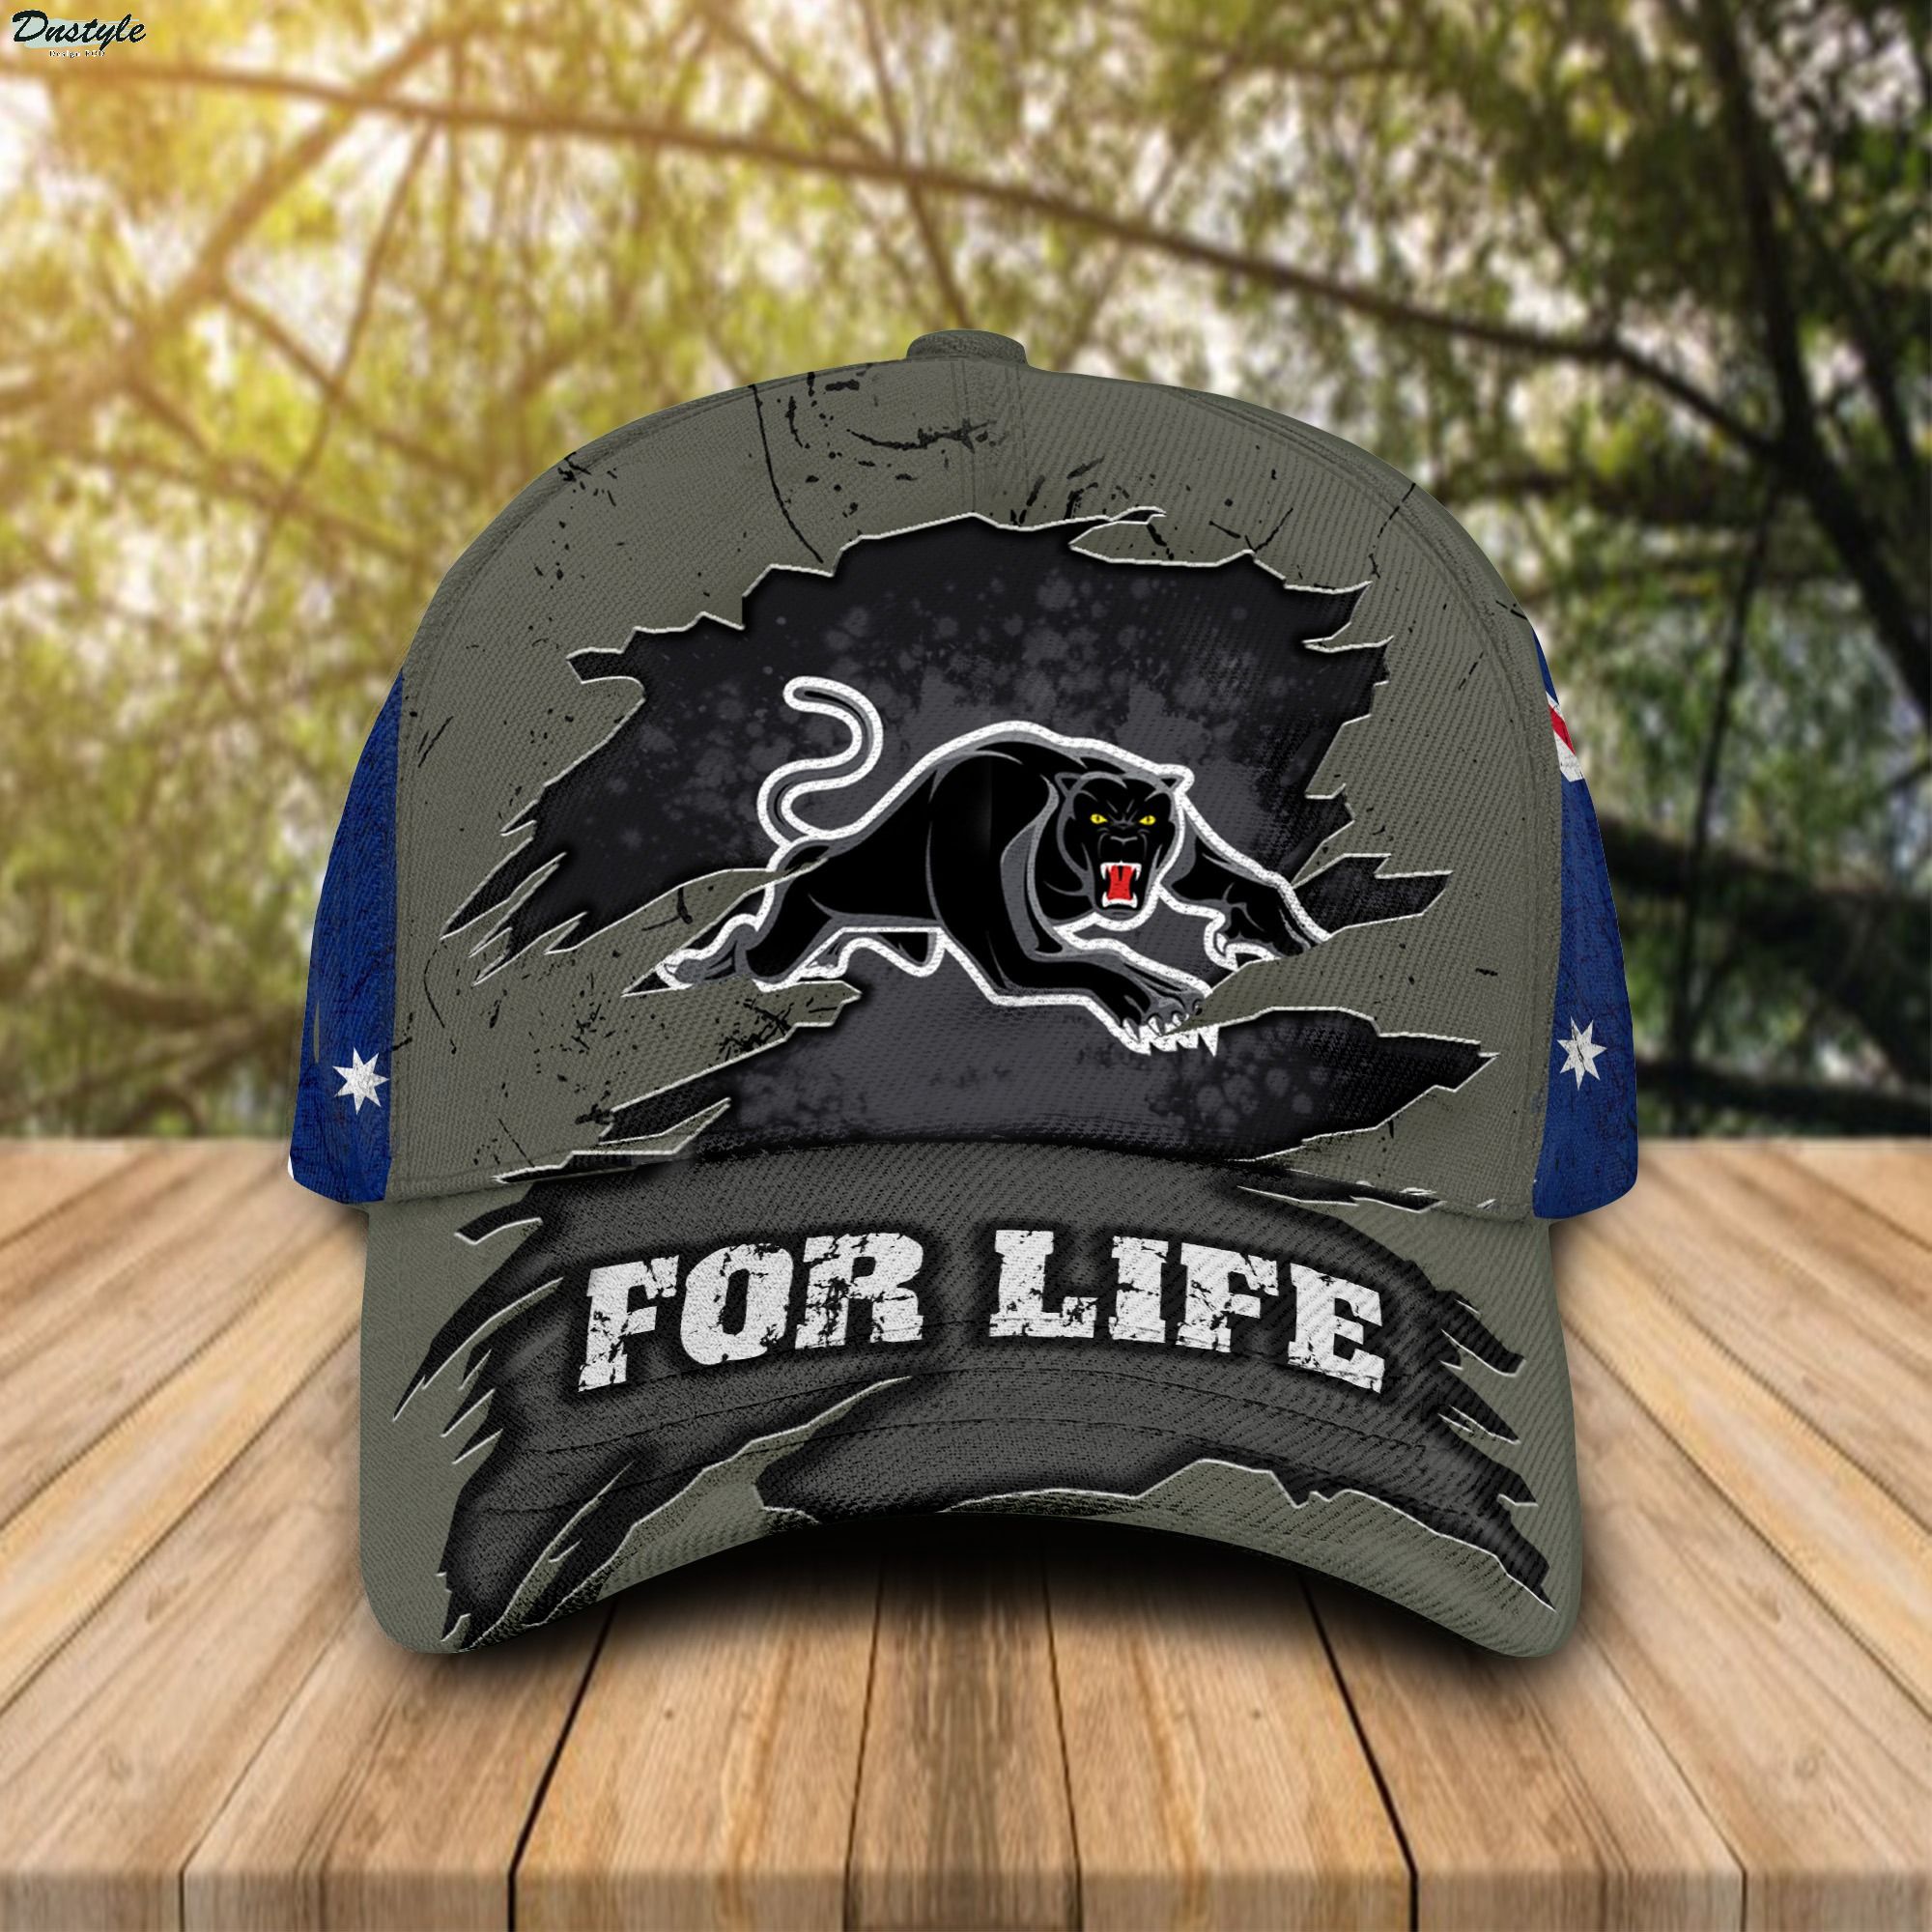 Penrith Panthers for life cap